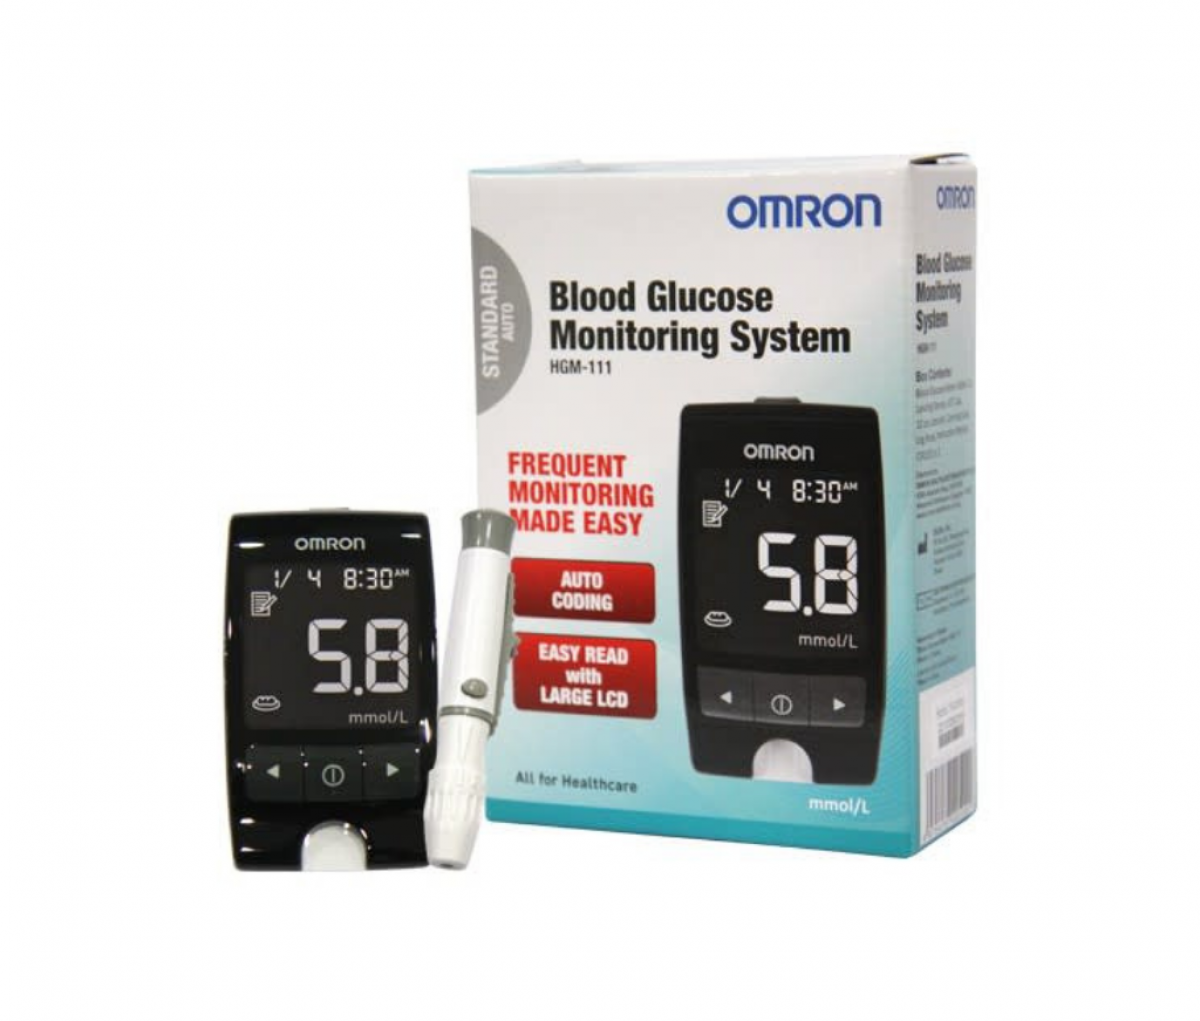 Omron Hgm-111 Glucometer